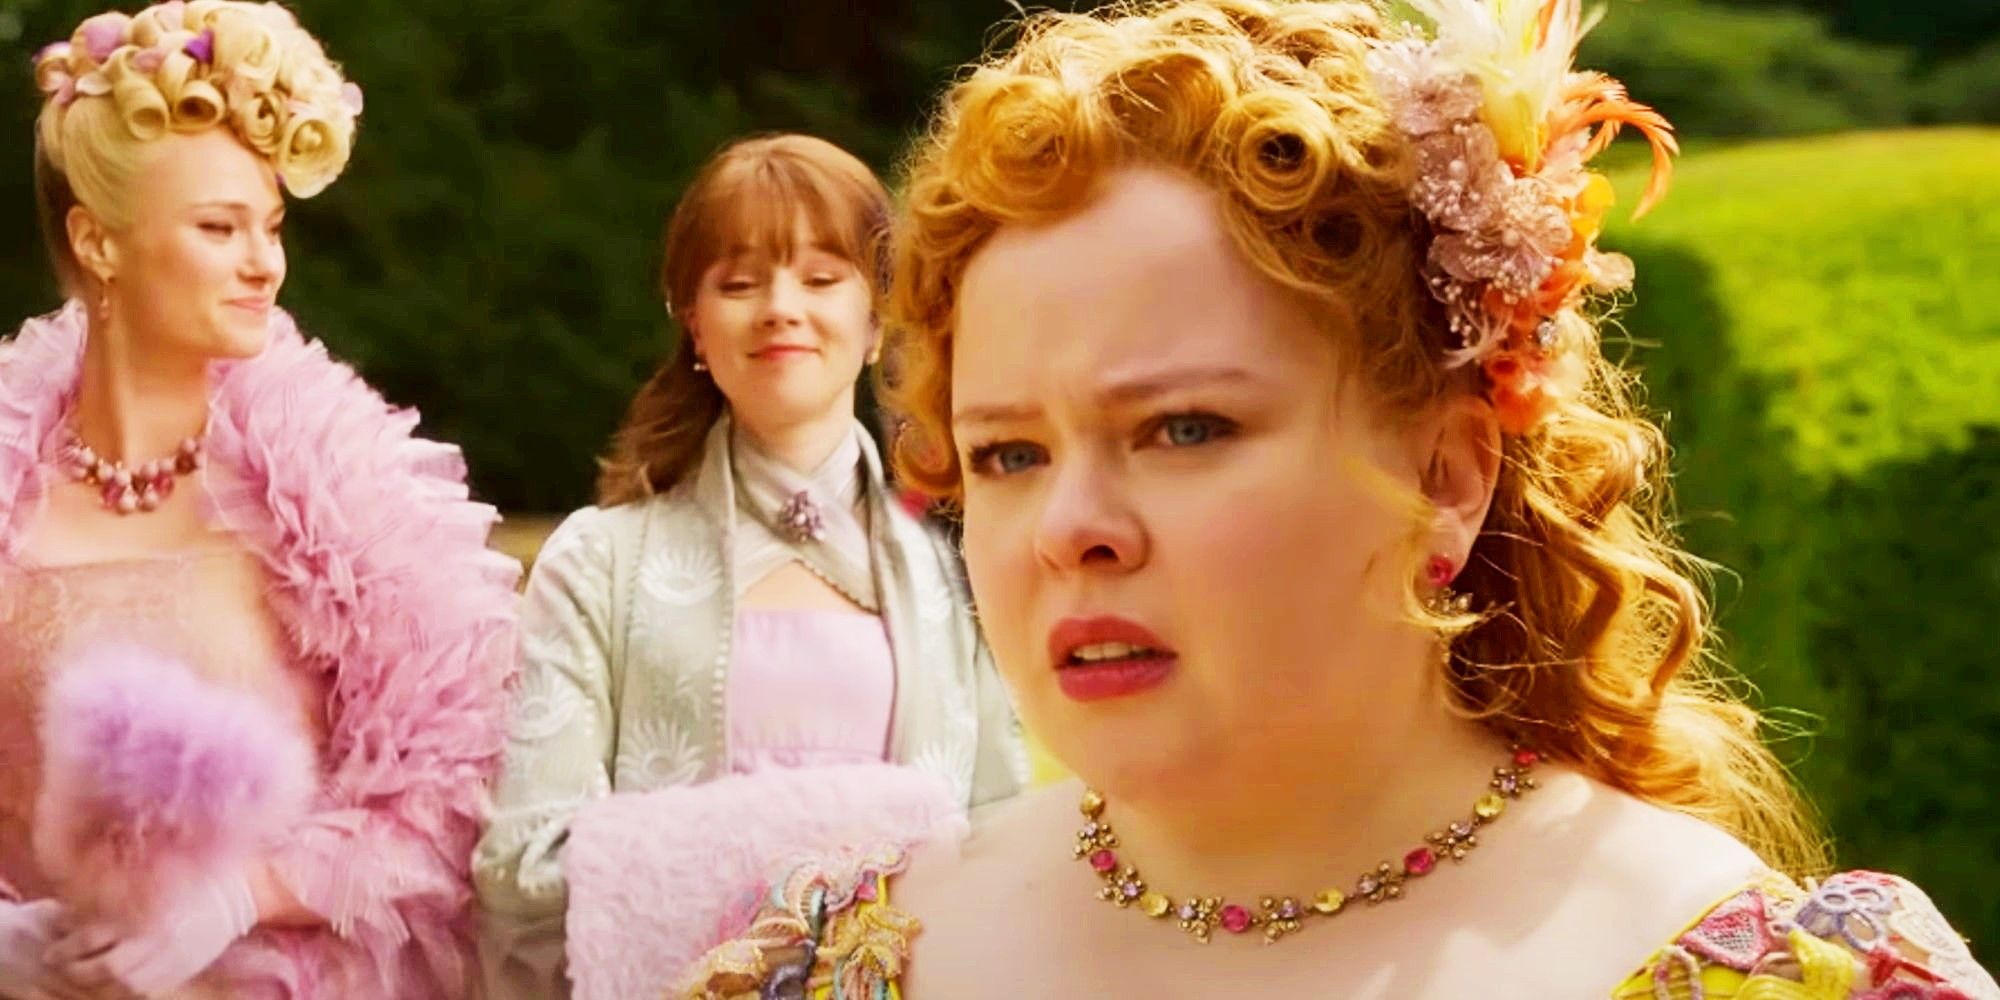 An image combining images of Cressida walking with Eloise in Bridgerton season 3, and Penelope looking disturbed and hurt in Bridgerton season 3